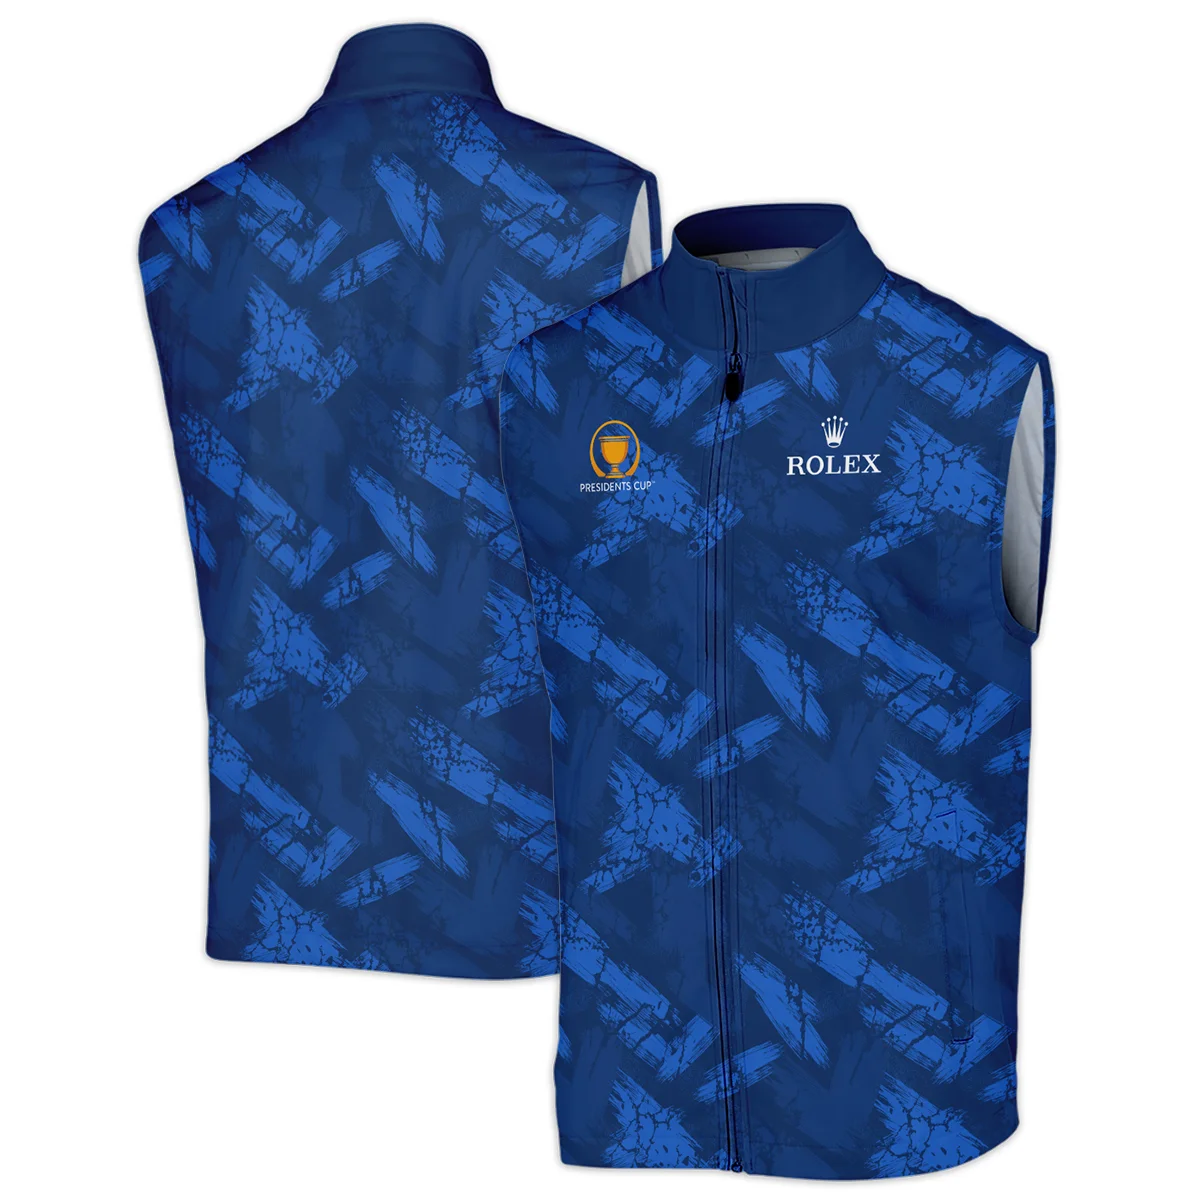 Golf Dark Blue With Grunge Pattern Presidents Cup Rolex Performance Quarter Zip Sweatshirt With Pockets All Over Prints HOPDC210624A01ROXTS